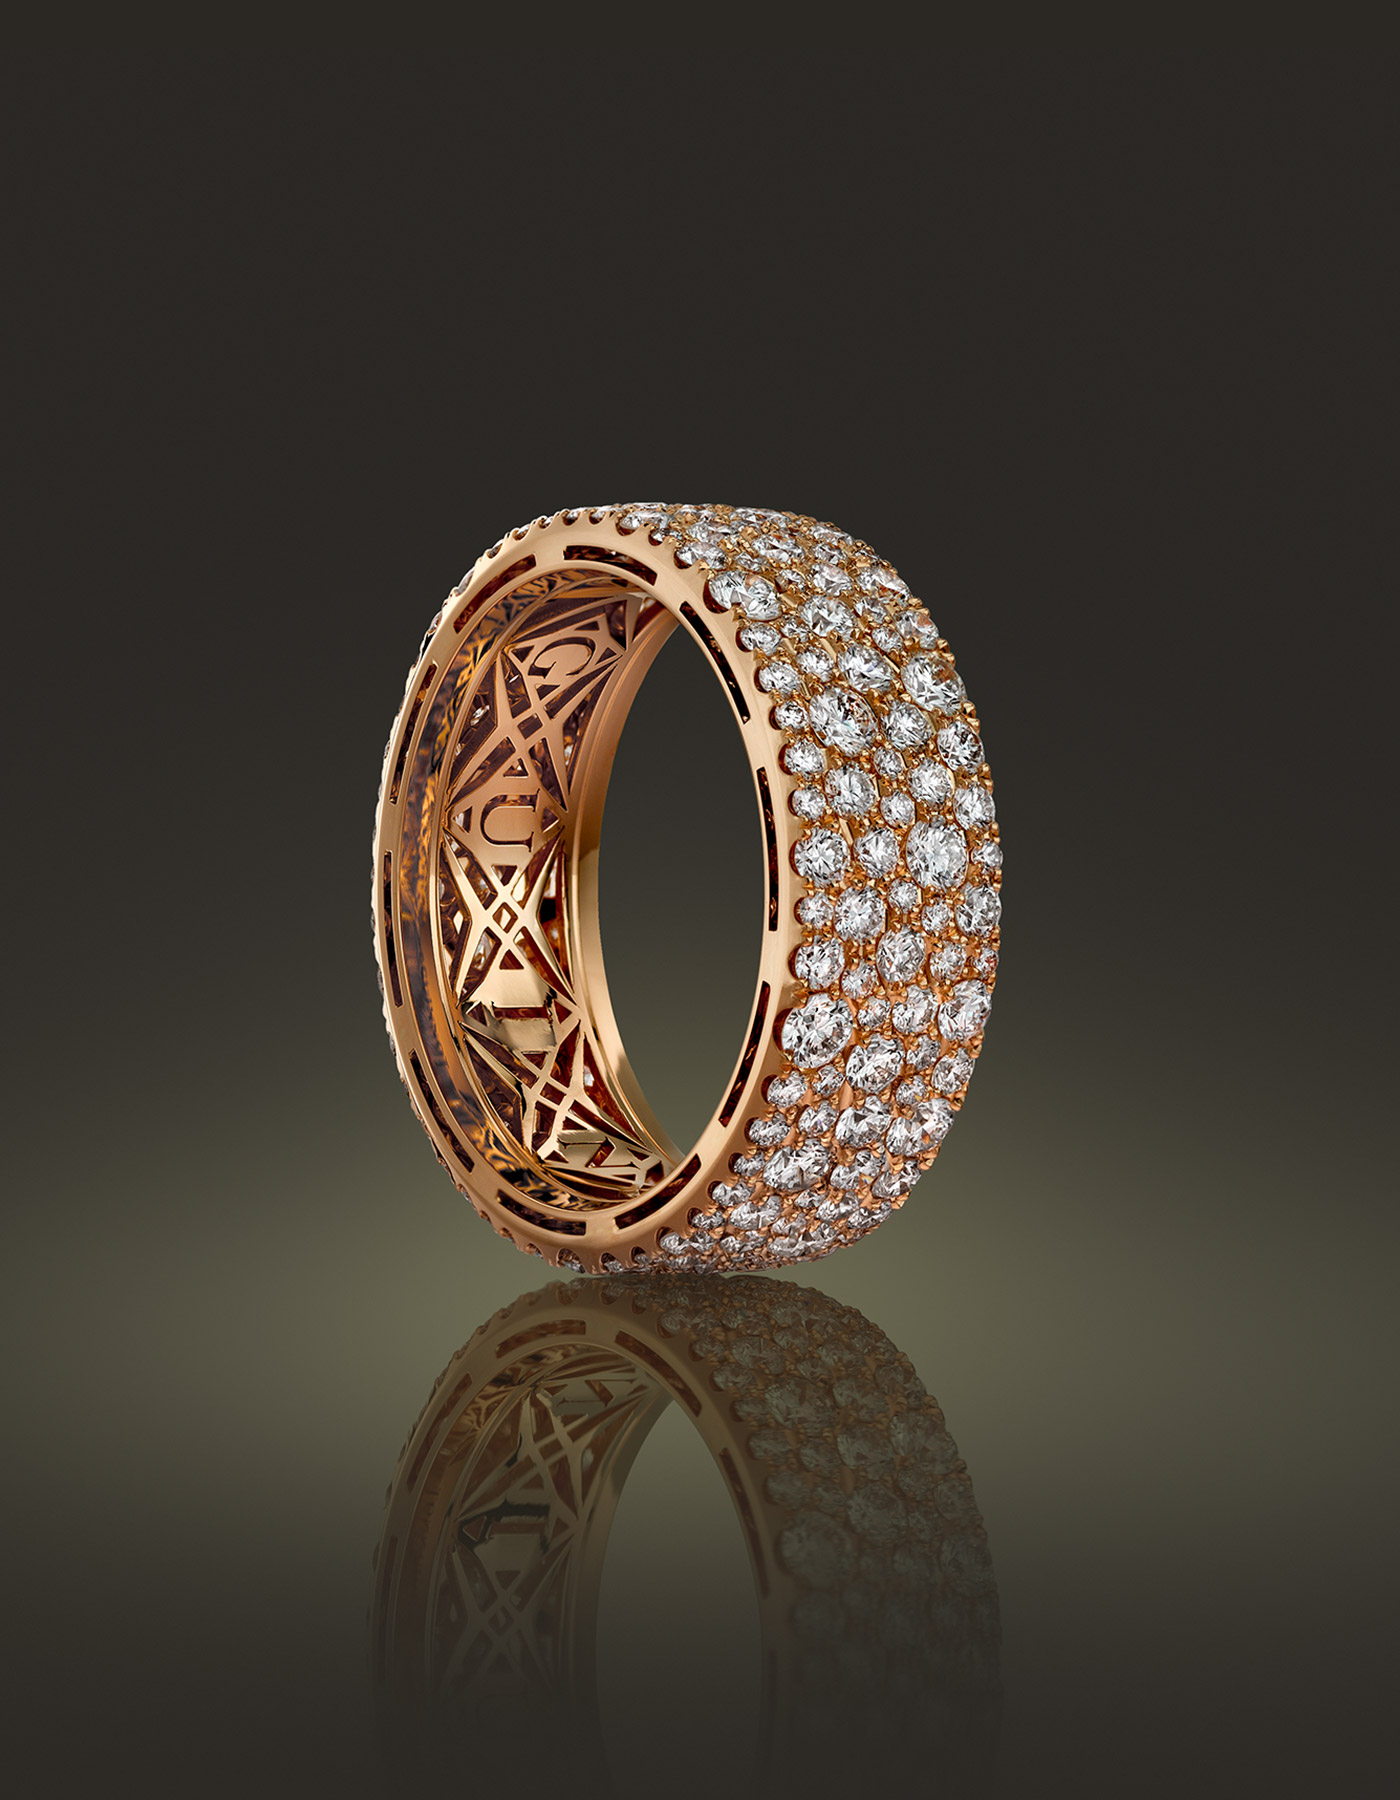 Guinnot Anonymous Snowset diamond ring in 18k rose gold